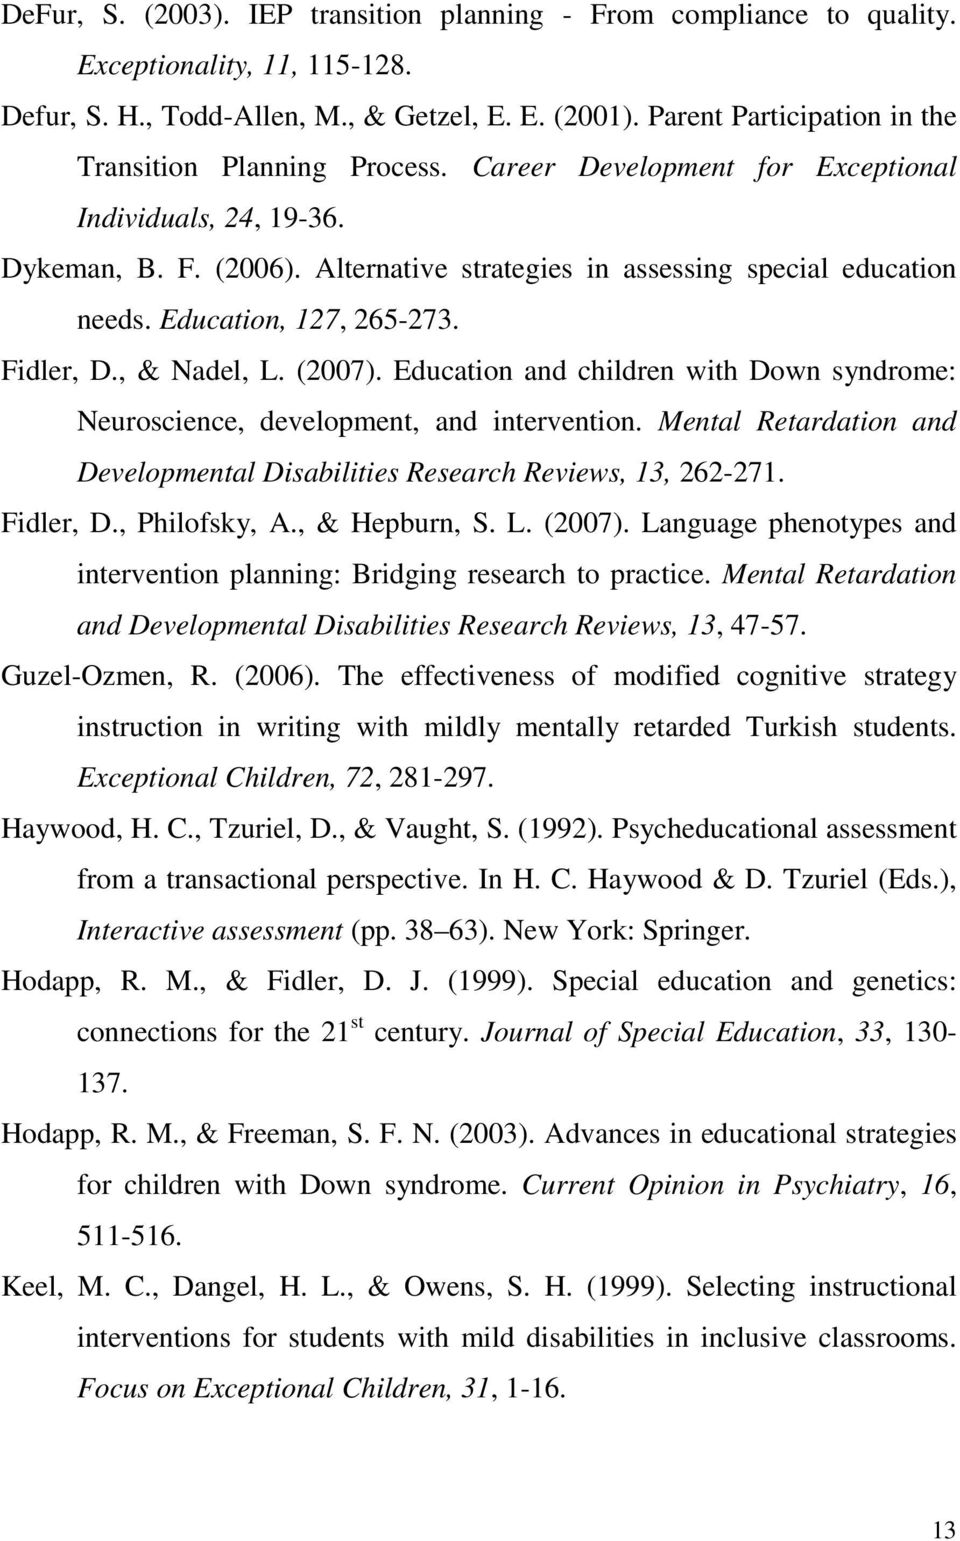 Education, 127, 265-273. Fidler, D., & Nadel, L. (2007). Education and children with Down syndrome: Neuroscience, development, and intervention.